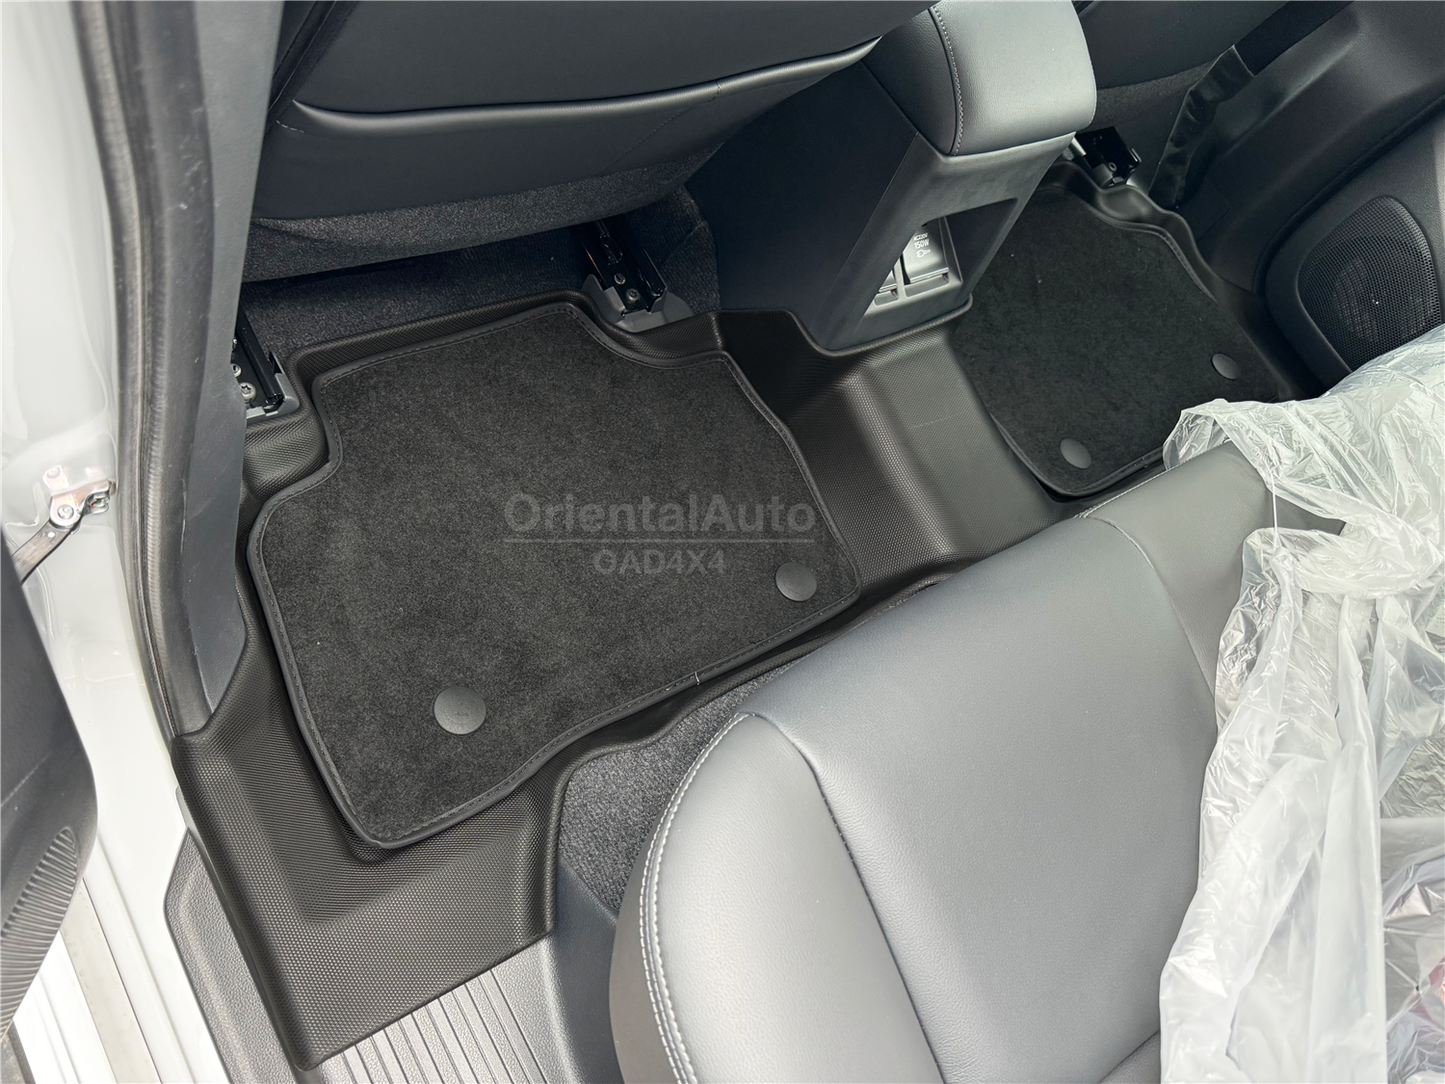 TPE Floor Mats & Cargo Mat for Mitsubishi Pajero Sport 7 Seater 2015-Onwards  Door Sill Covered Double Layer Car Mats Carpet Liner + Boot Mat